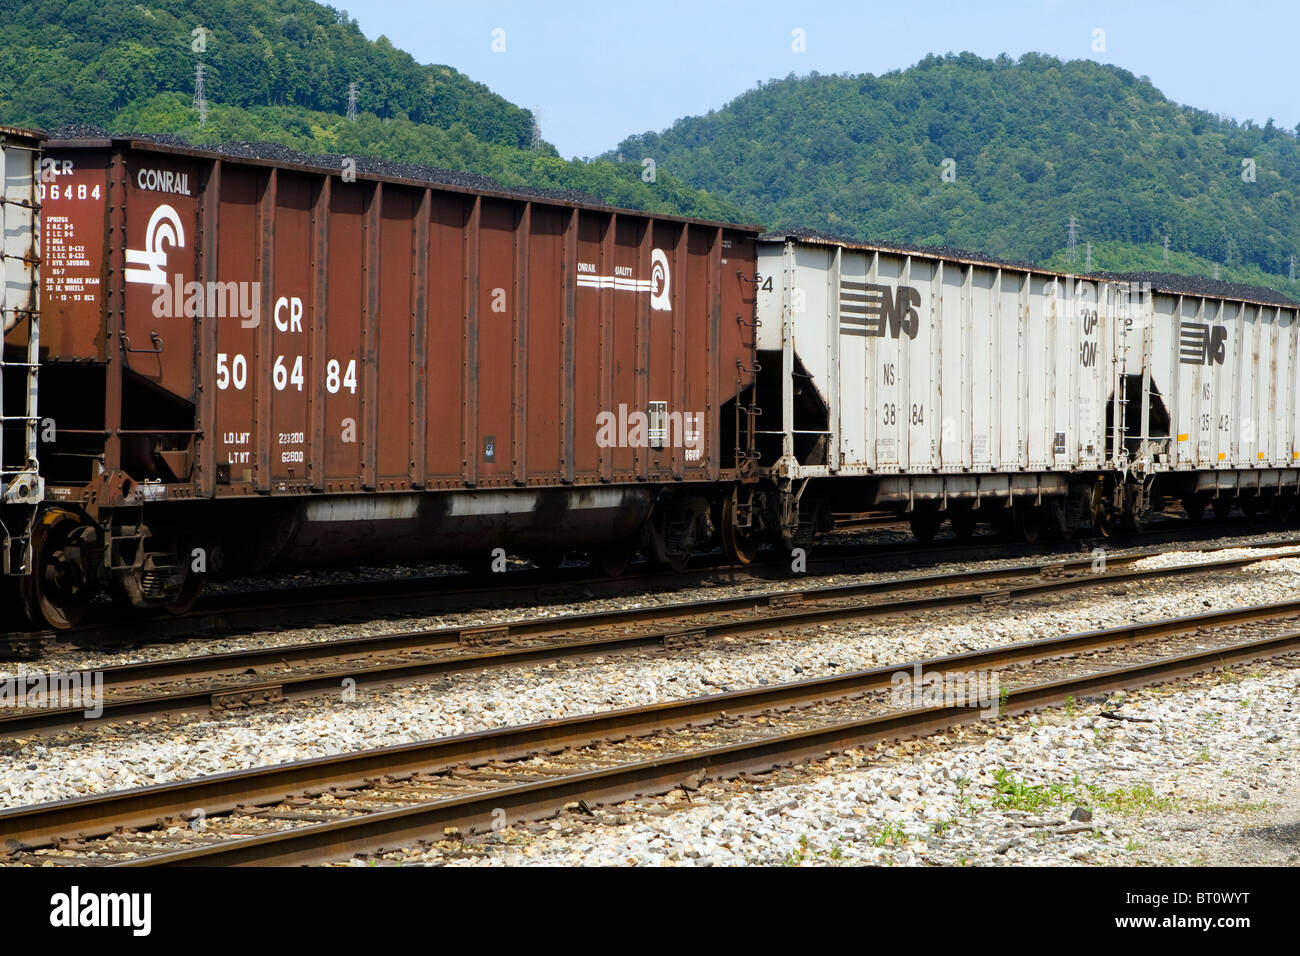 A row of railroad coal cars in a rail yard in West Virgina, USA. Stock Photo